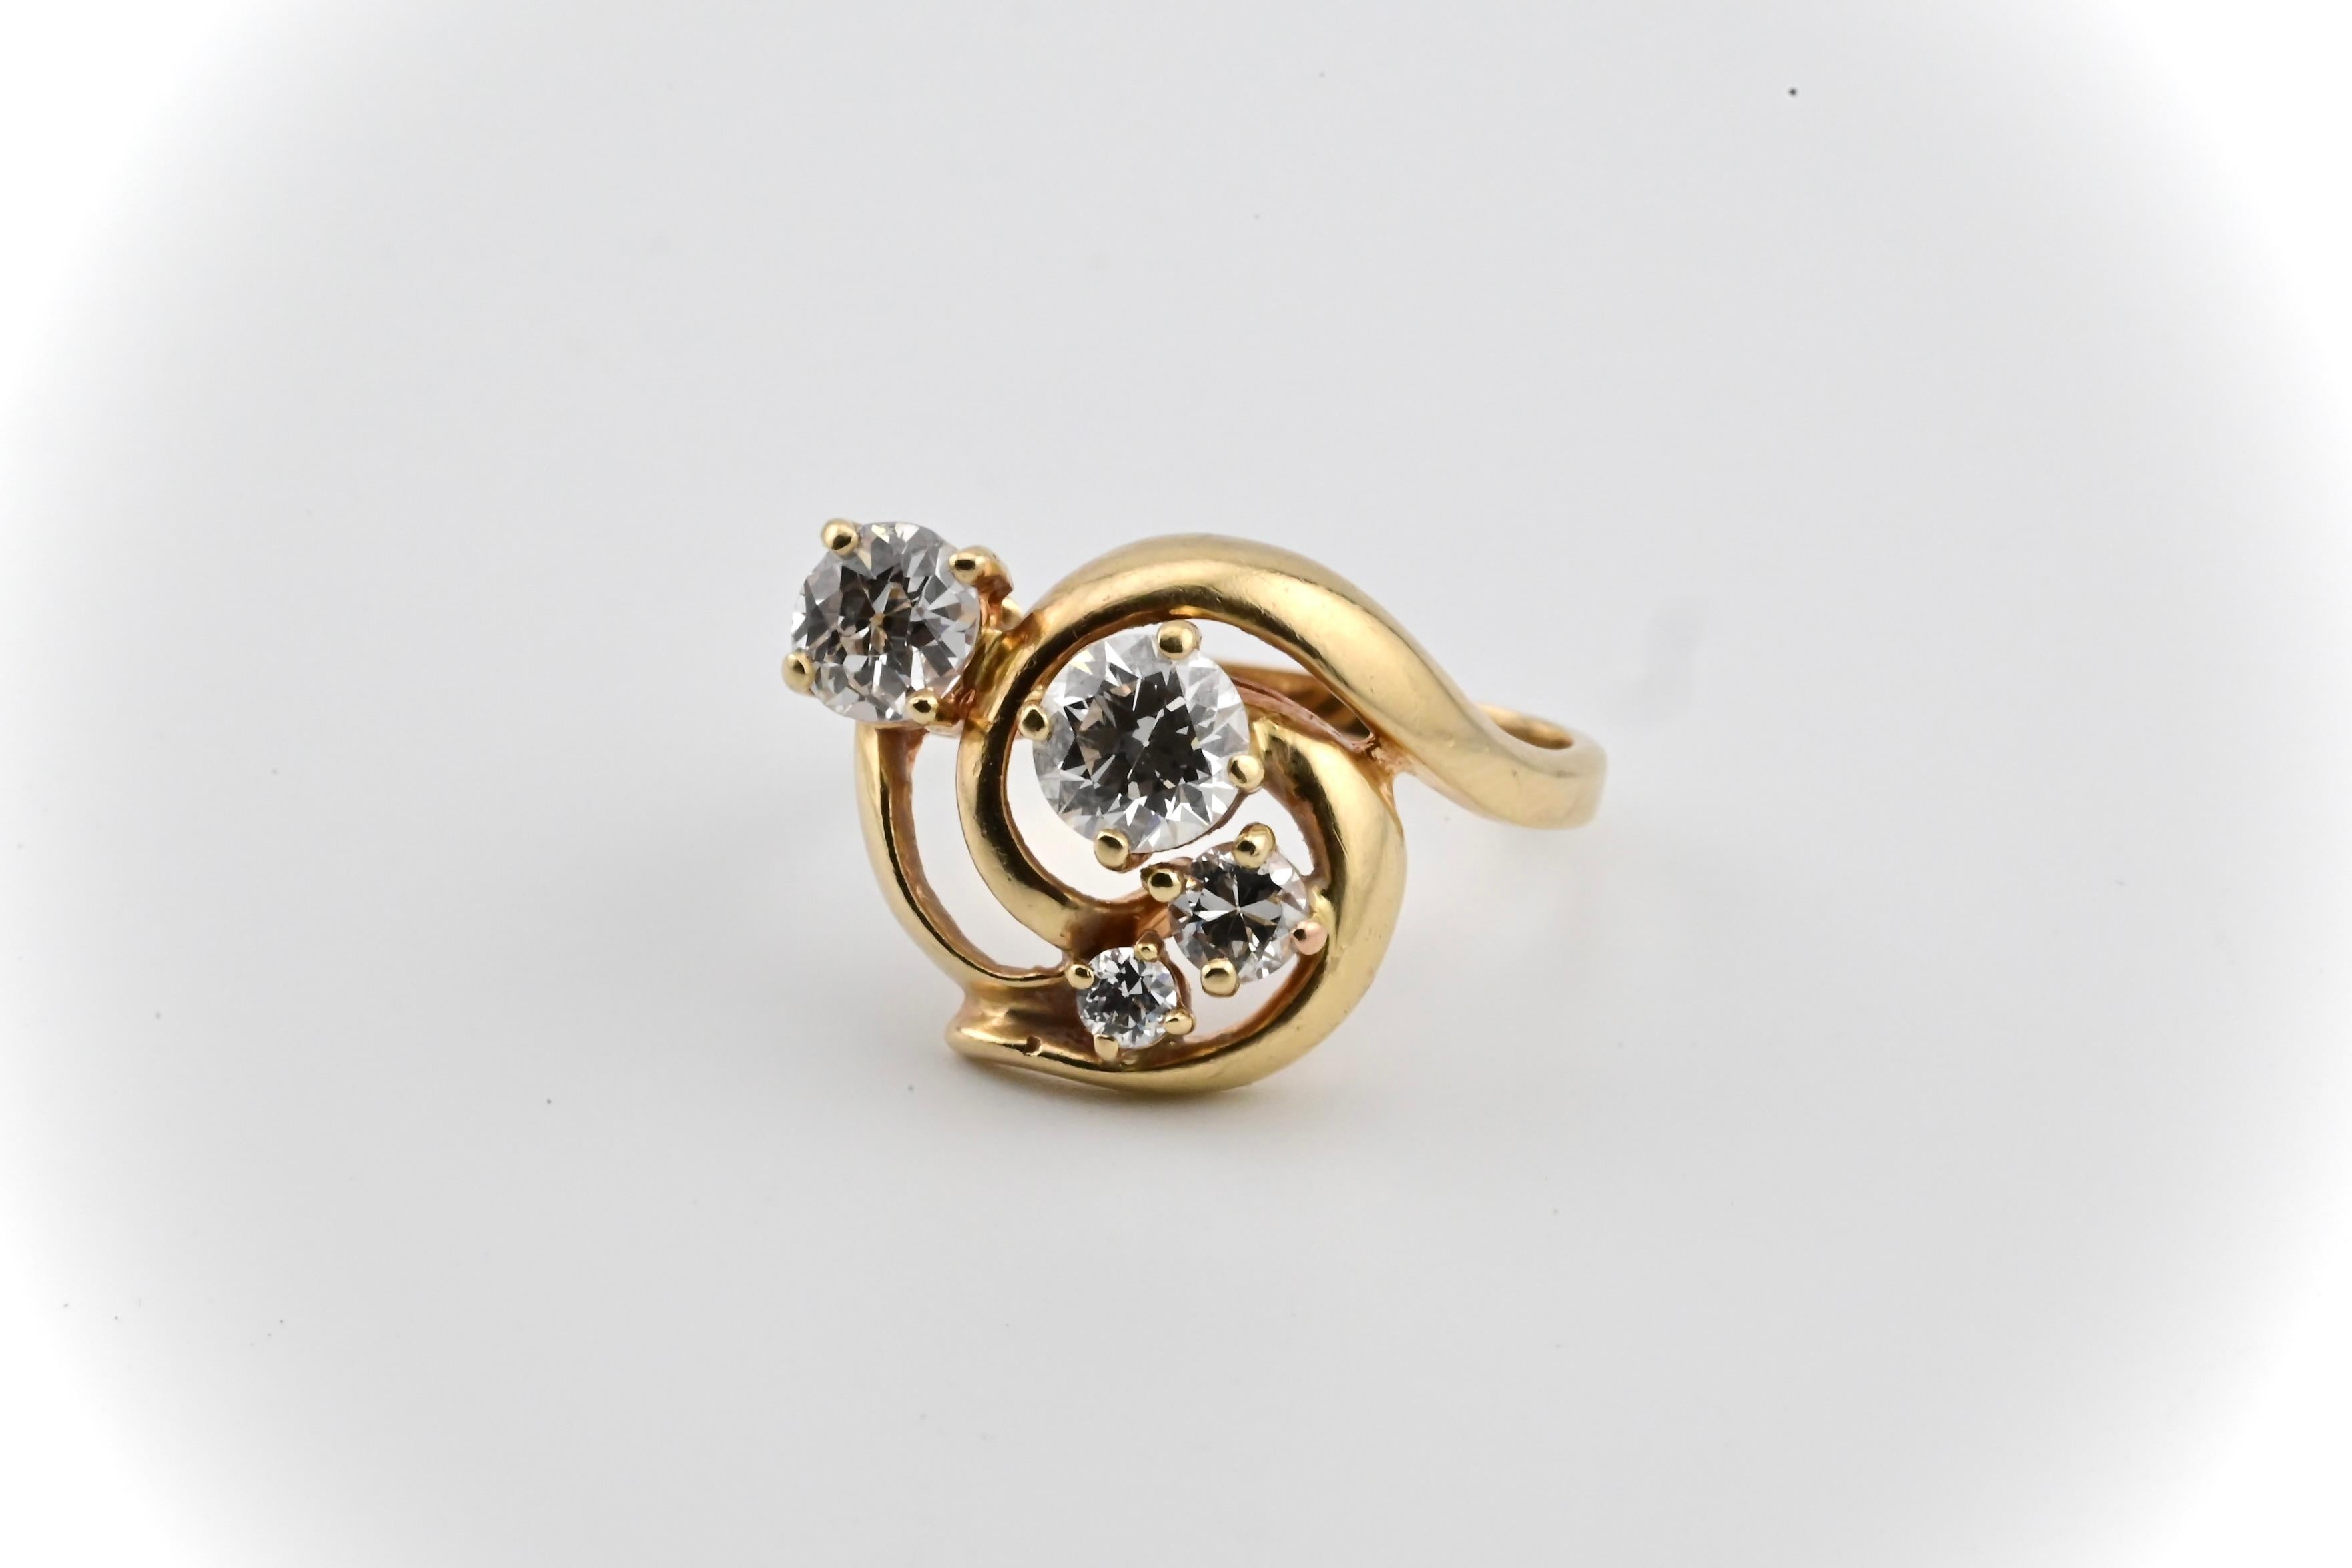 This is a gorgeous, yet elegant free from styled gold & diamond ring. The three diamond stones in the middle compliment each other with a big to small stone size gradient, with a single stone complementing the trio on the left. Quality is VS and